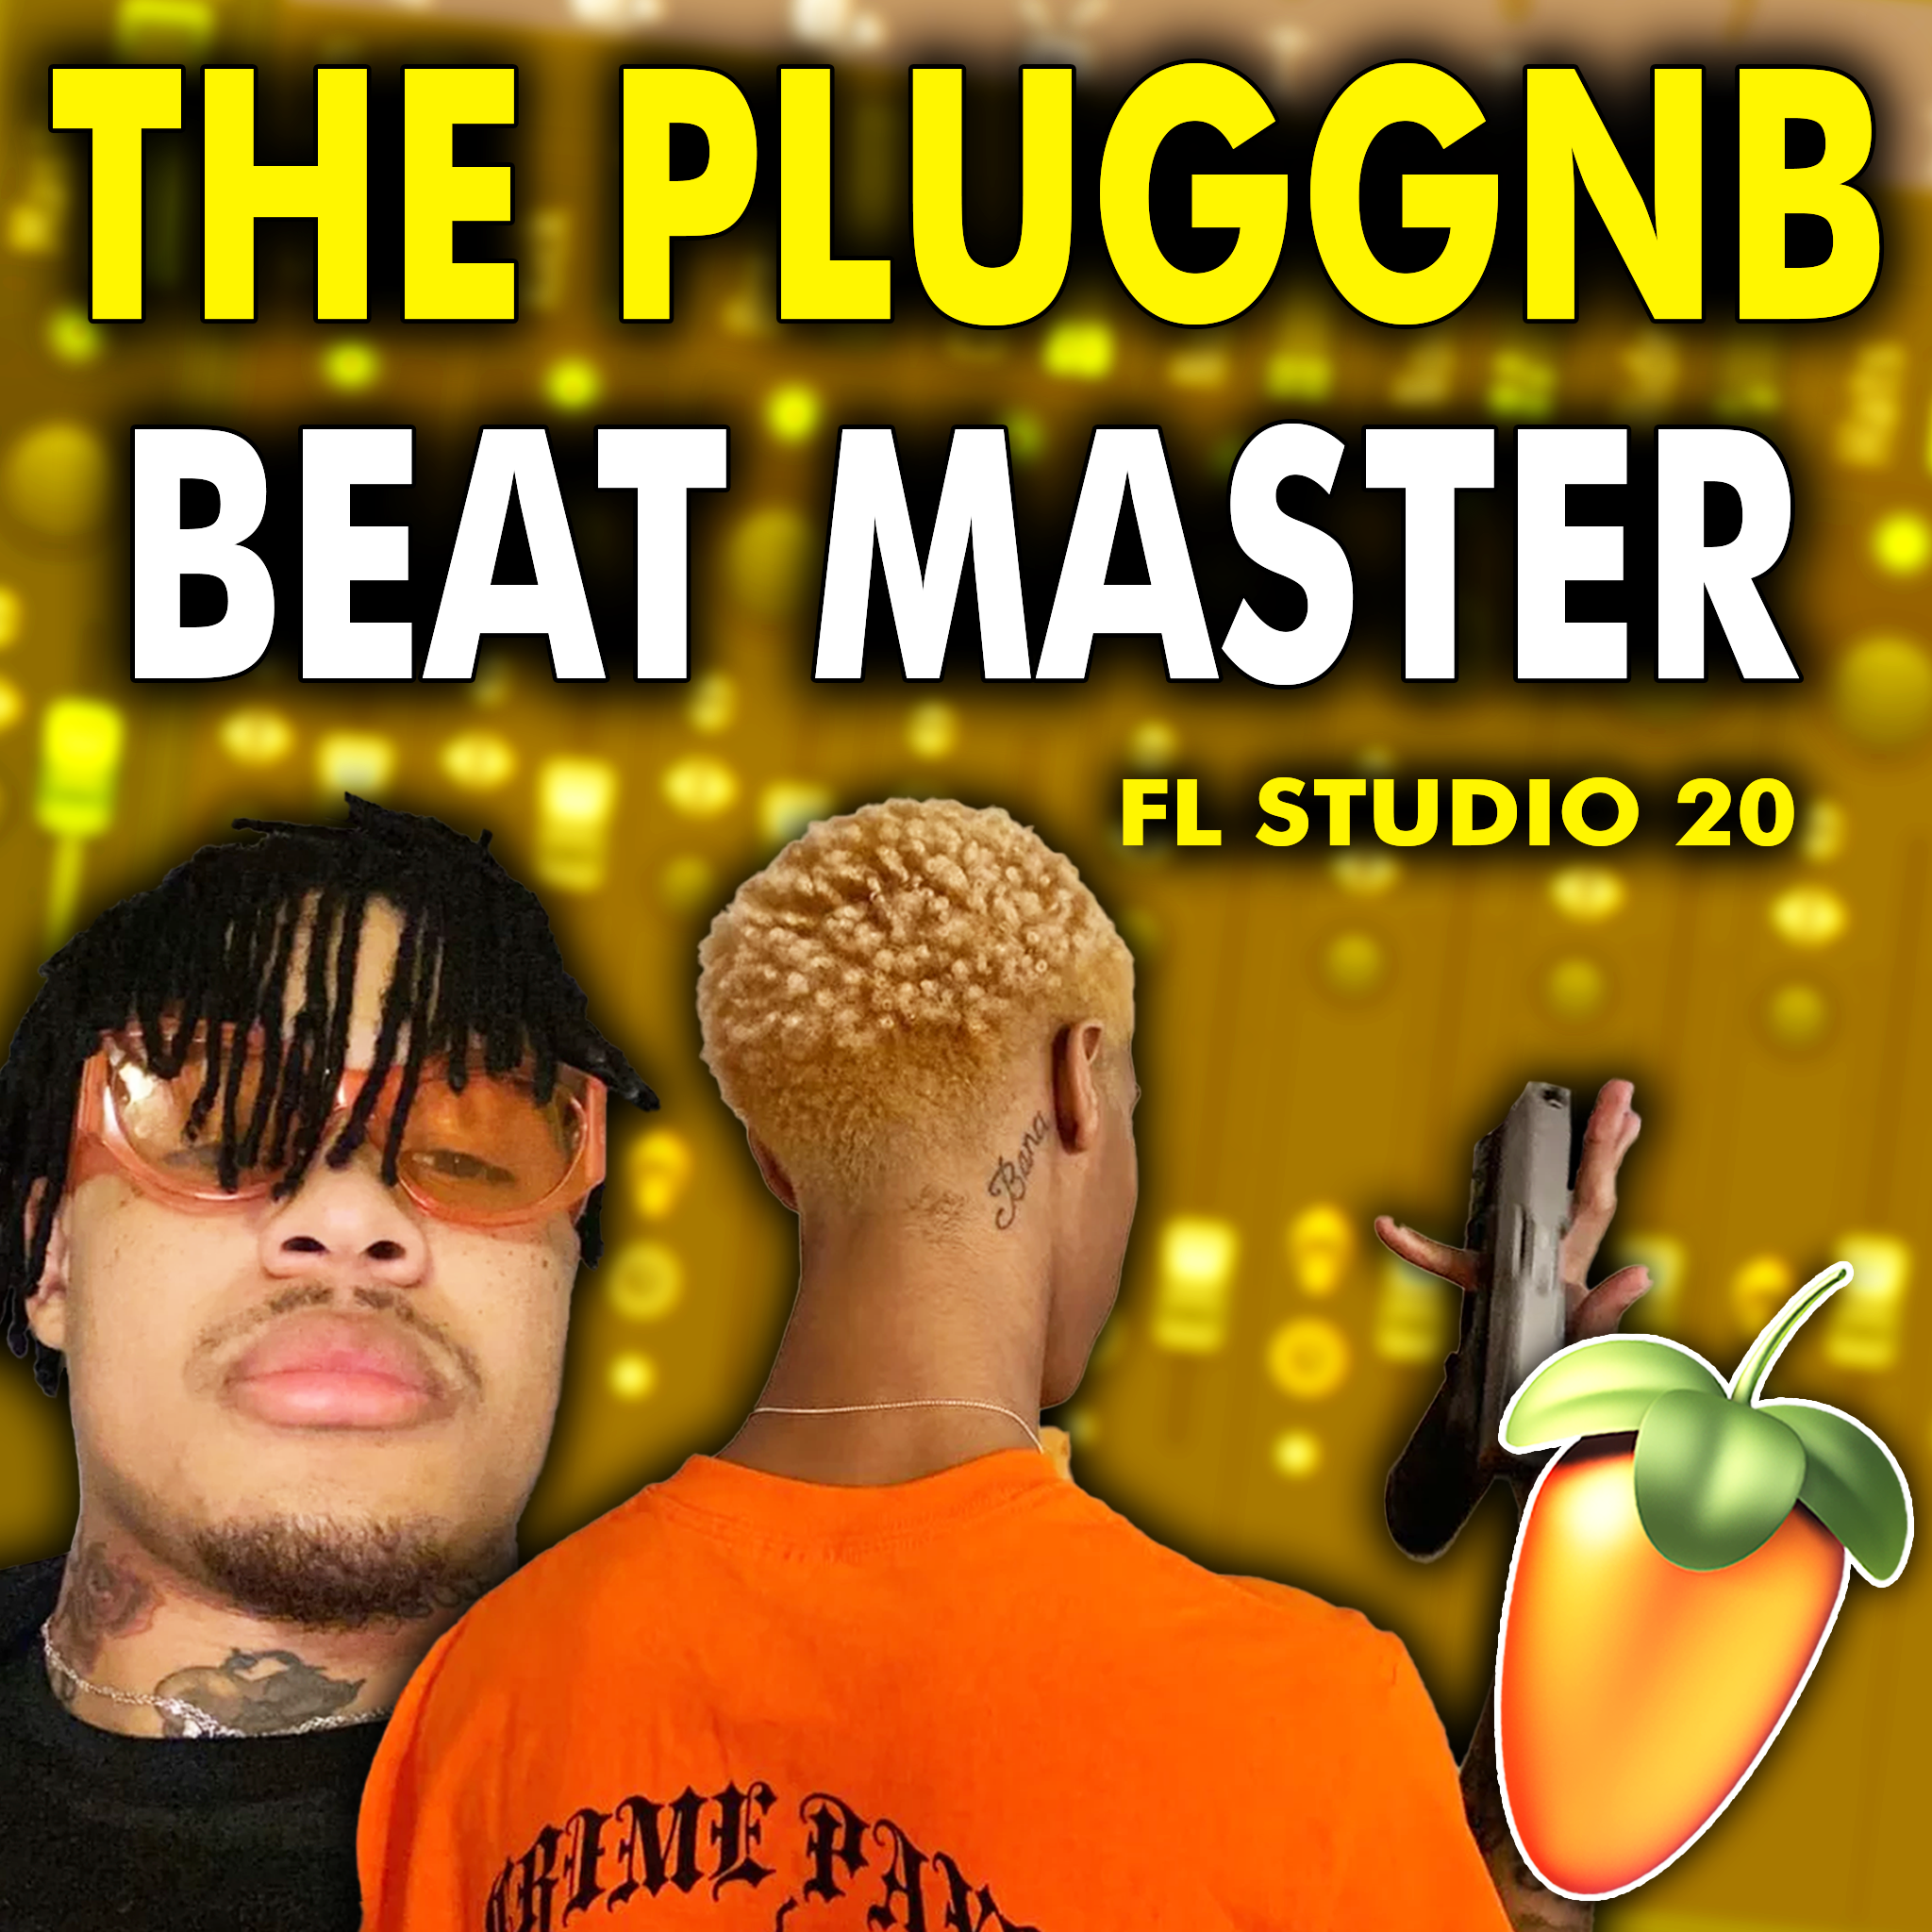 The Pluggnb Beat Master